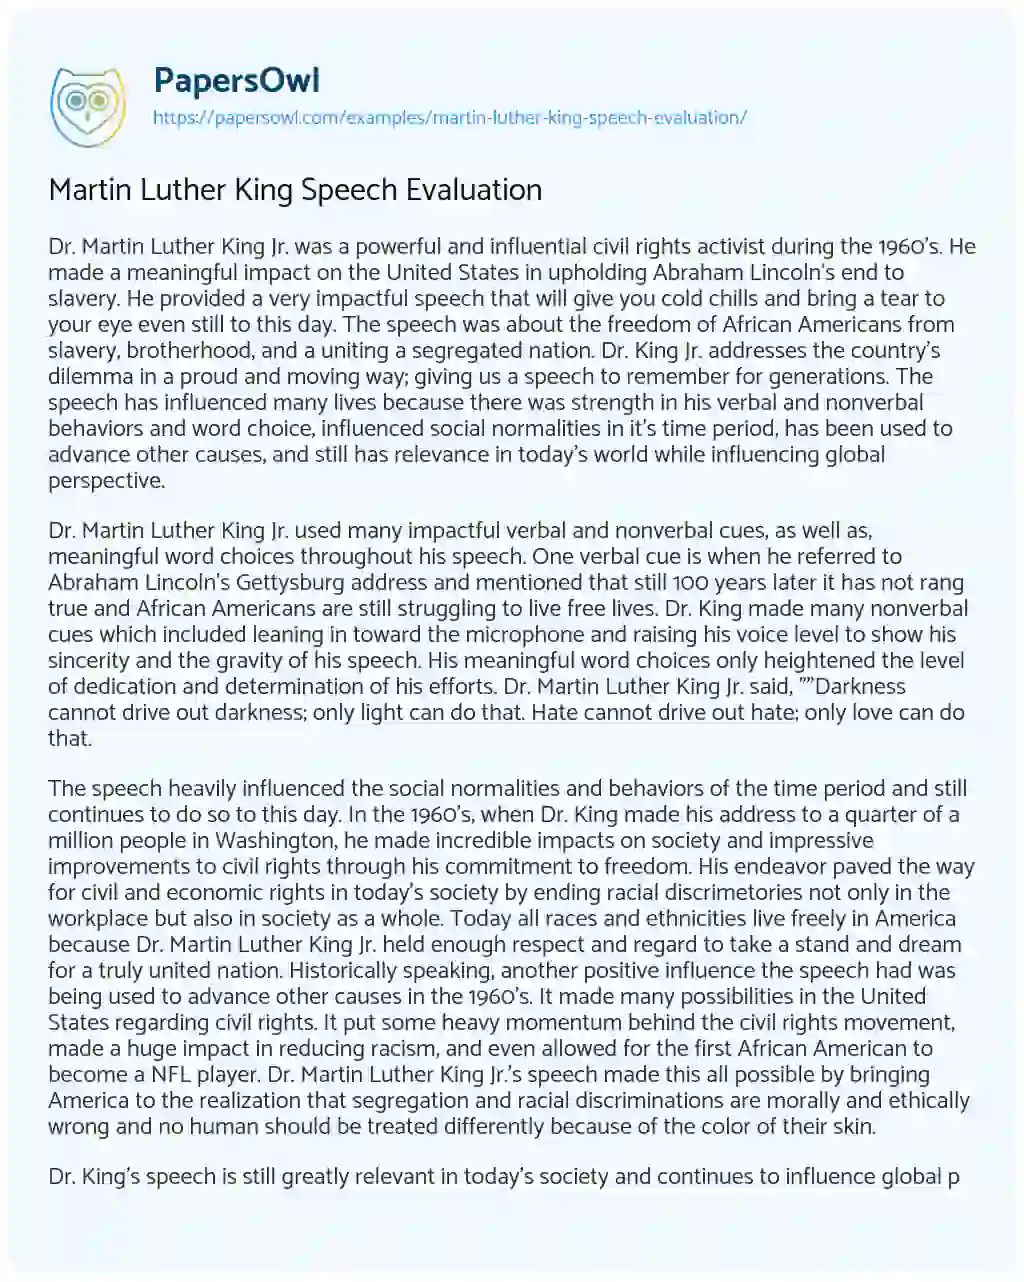 Essay on Martin Luther King Speech Evaluation